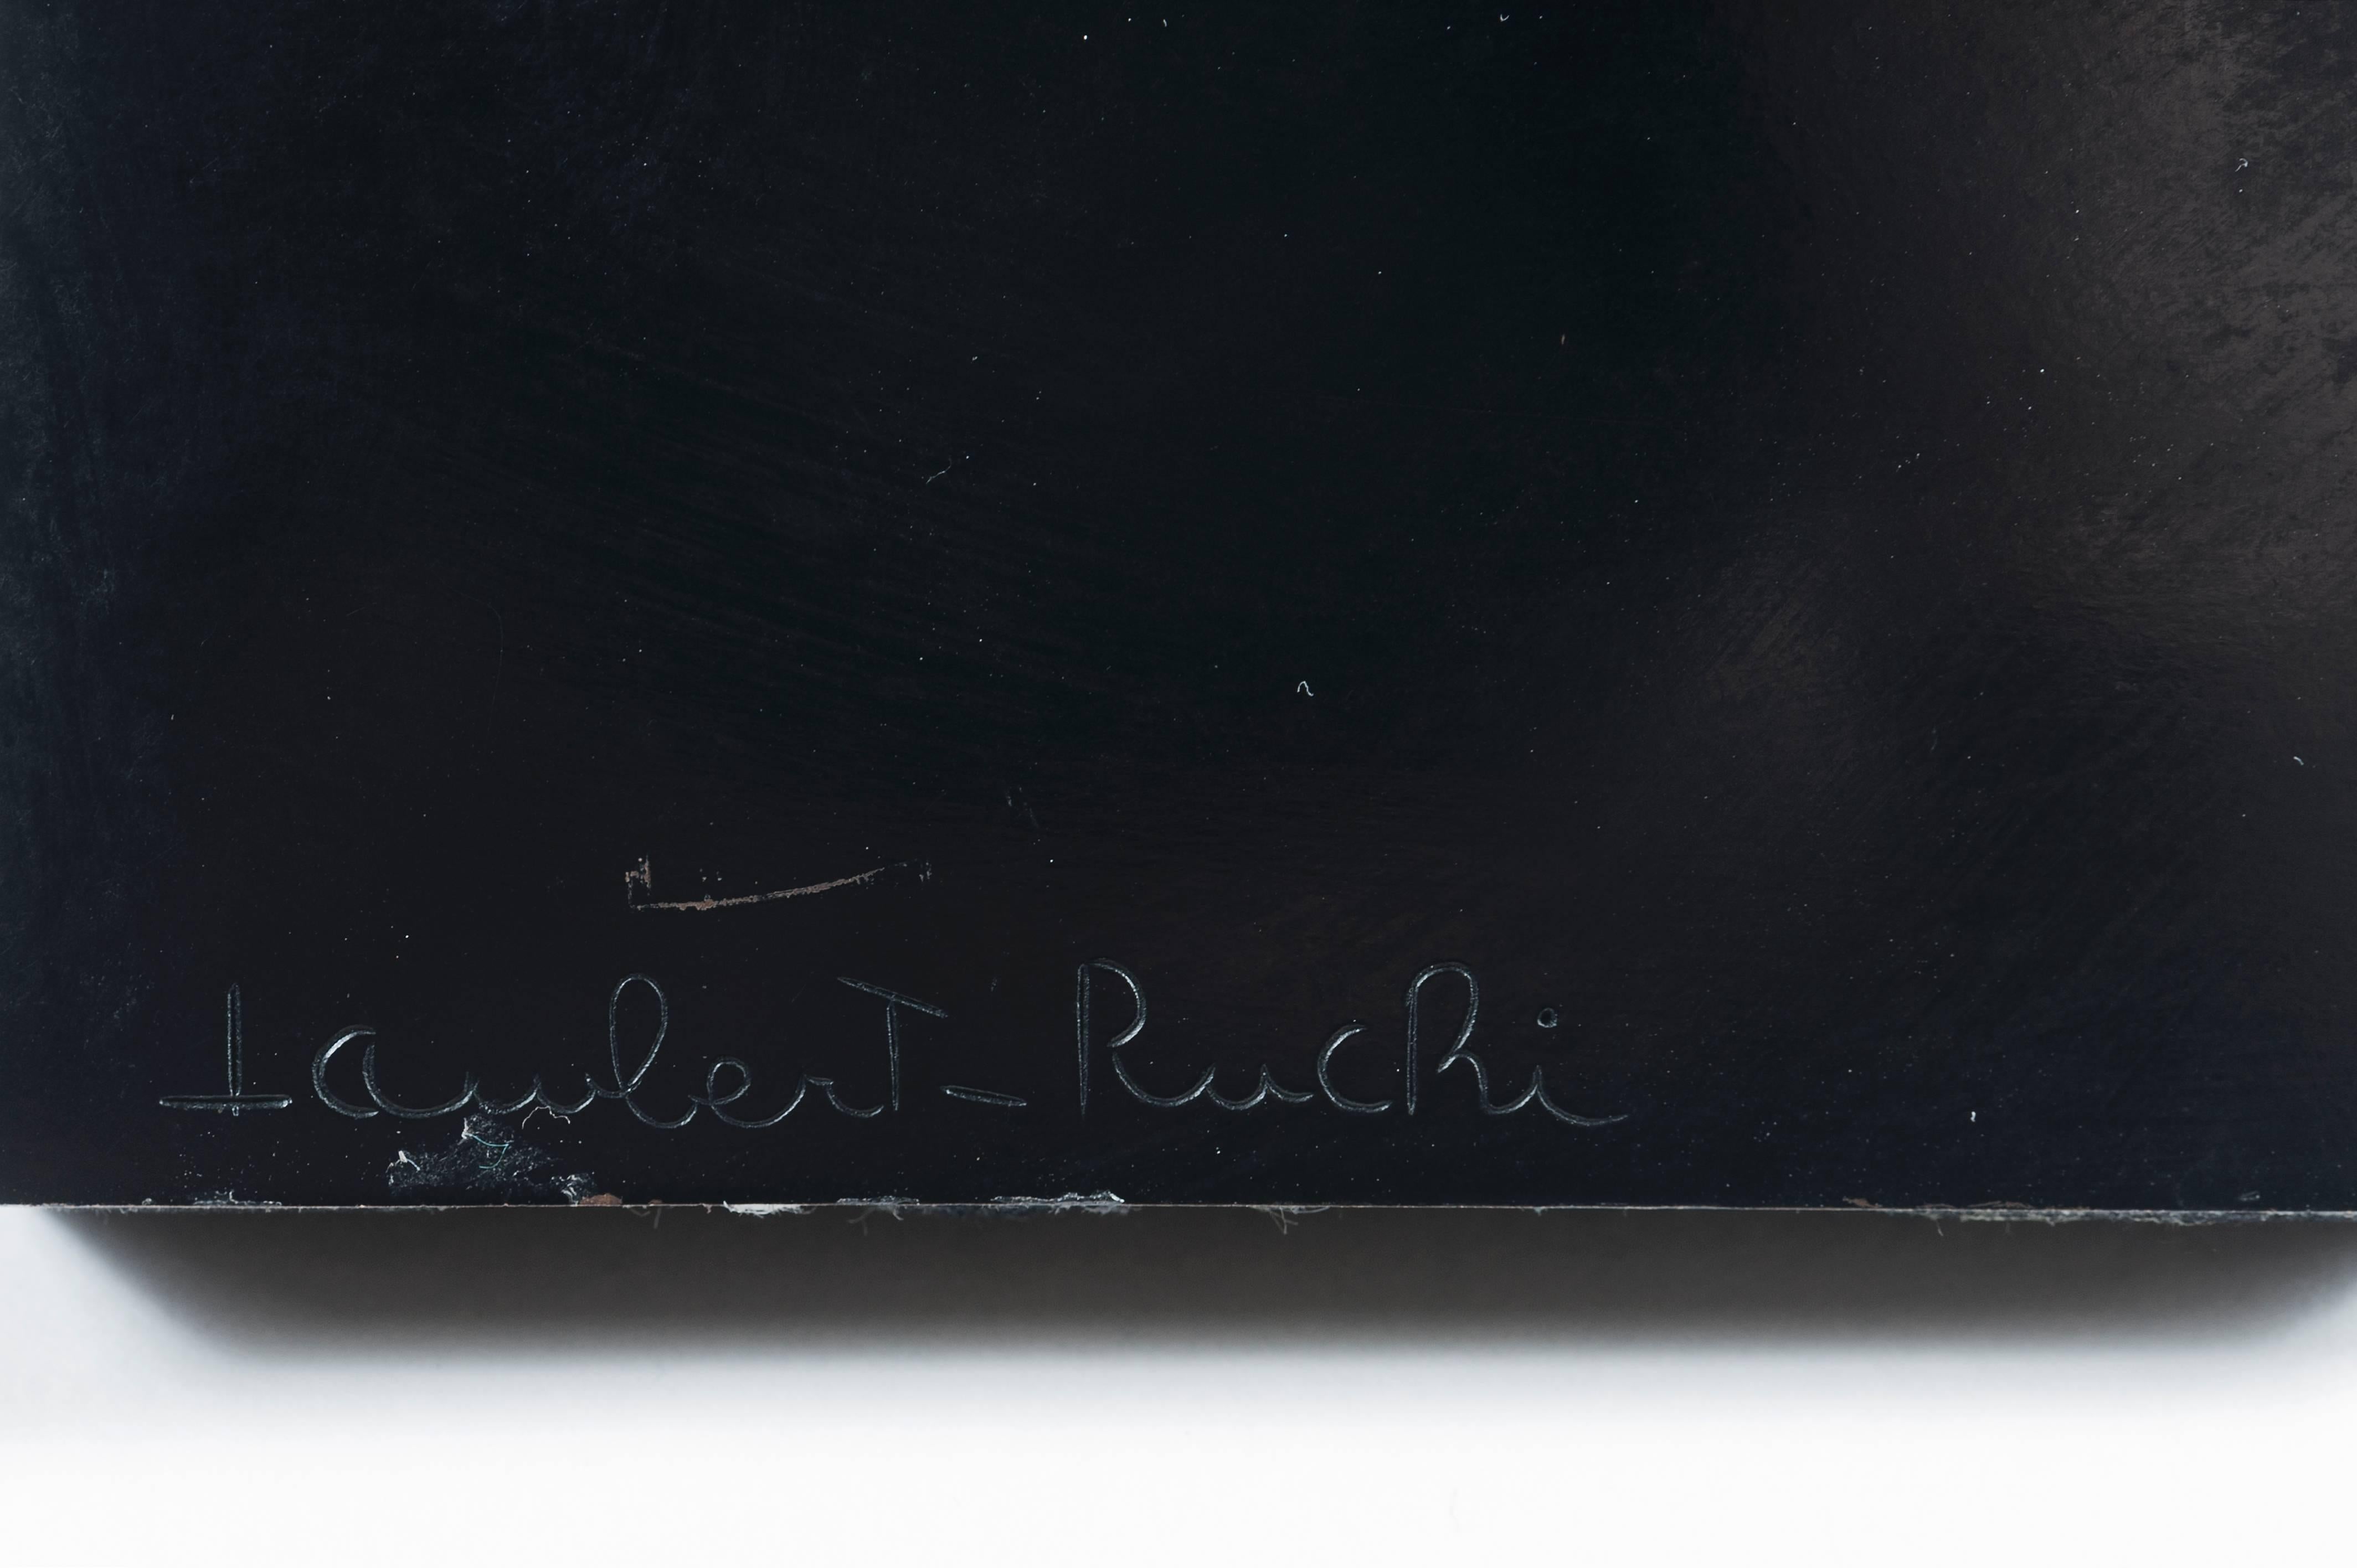 Black patinated bronze, signed, foundry stamp Blanchet, JDV stamp, cast number 5/8. 	Original limited posthumous edition of 8 castings plus 4 artist’s proofs with the legal successors agreement.

Bibliography : 